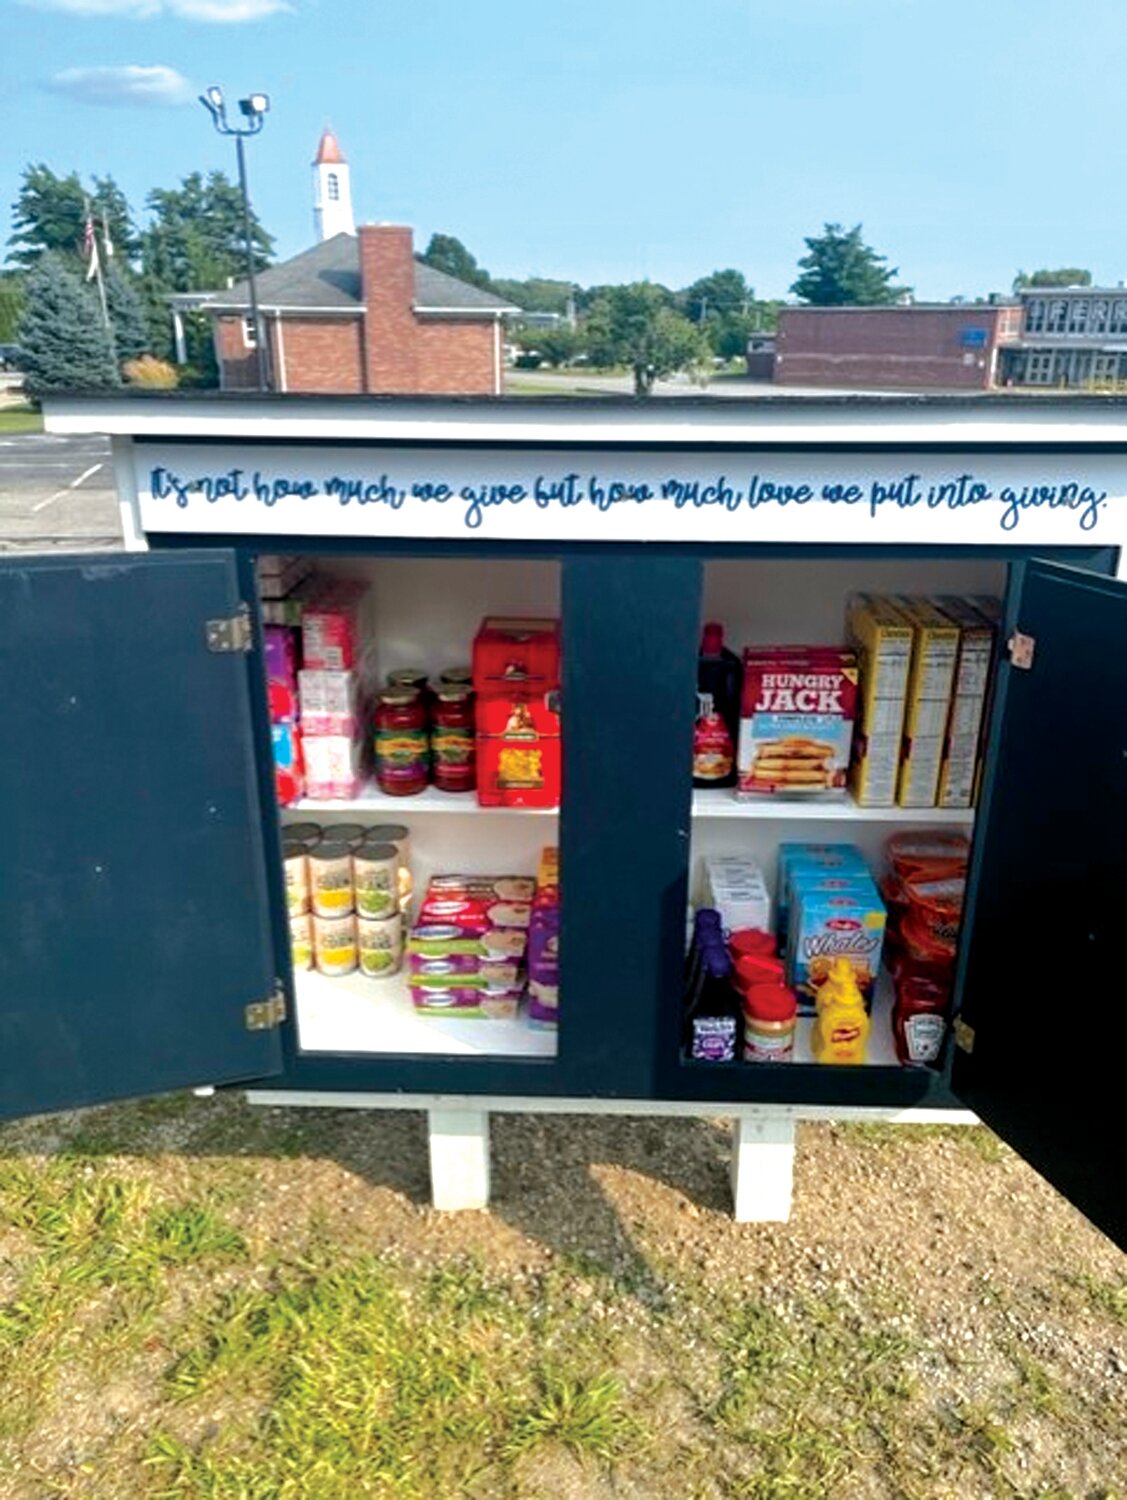 THE HOPE CHEST: Johnston’s Hope Chest stands along Memorial Avenue next to Marian J. Mohr Memorial Library, erected by Plates With Purpose, a local nonprofit. Anyone in need of food is encouraged to stop by and help themselves. Those with extra food are encouraged to donate shelf-stable items.